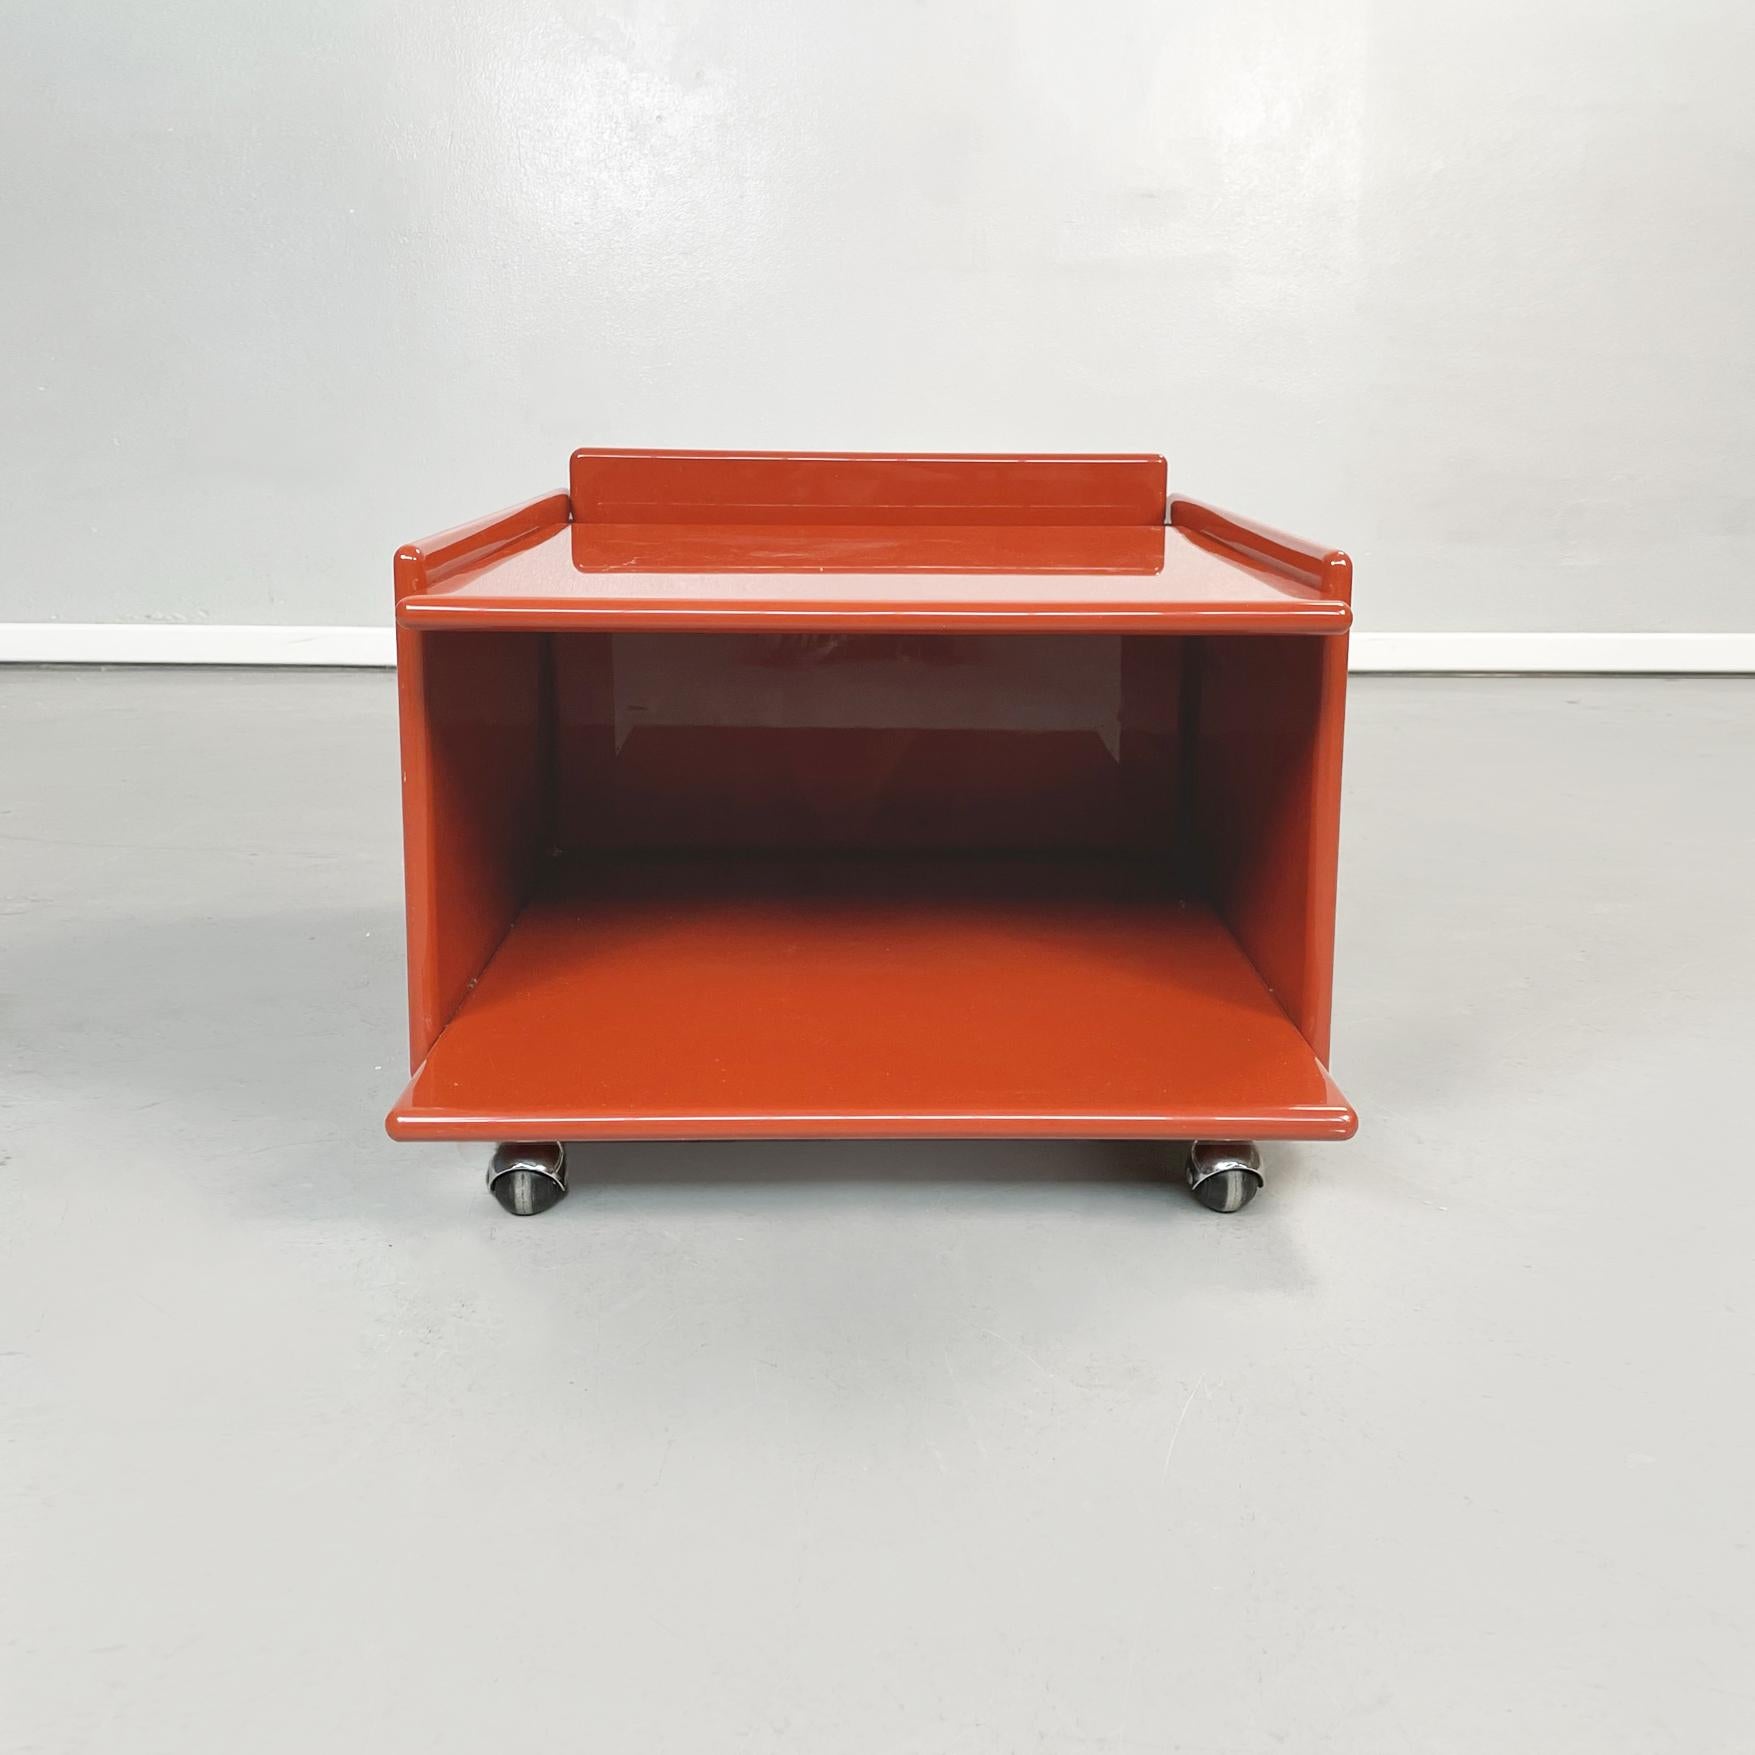 Mid-Century Modern Italian Modern Red Lacquered Wooden Bedside Table by Takahama for Gavina, 1970s